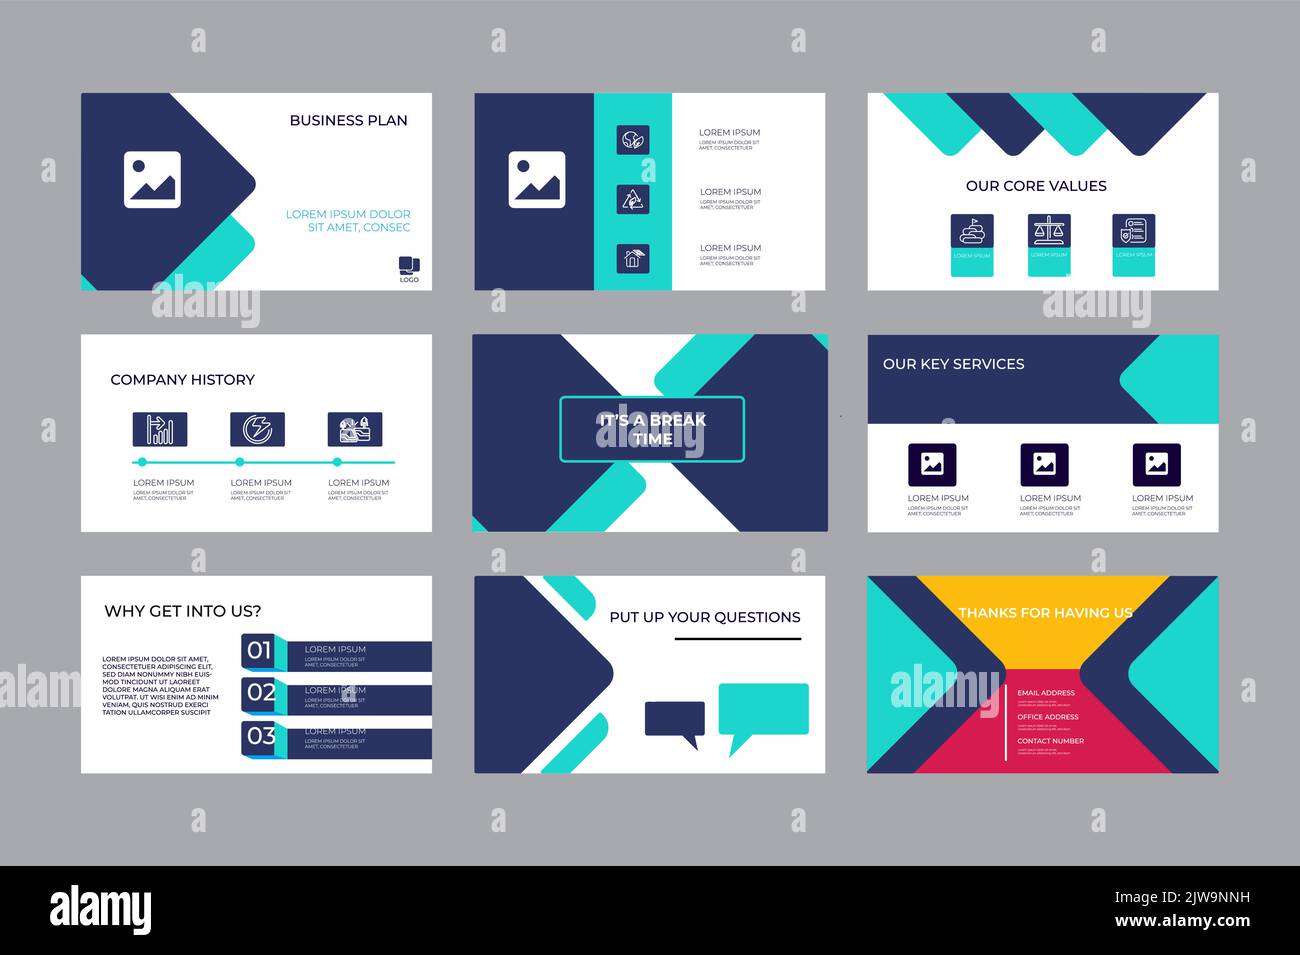 Pitch deck presentation design template. Geometric abstract shapes composition. People paying for purchases with credit card, conducts financial Stock Vector